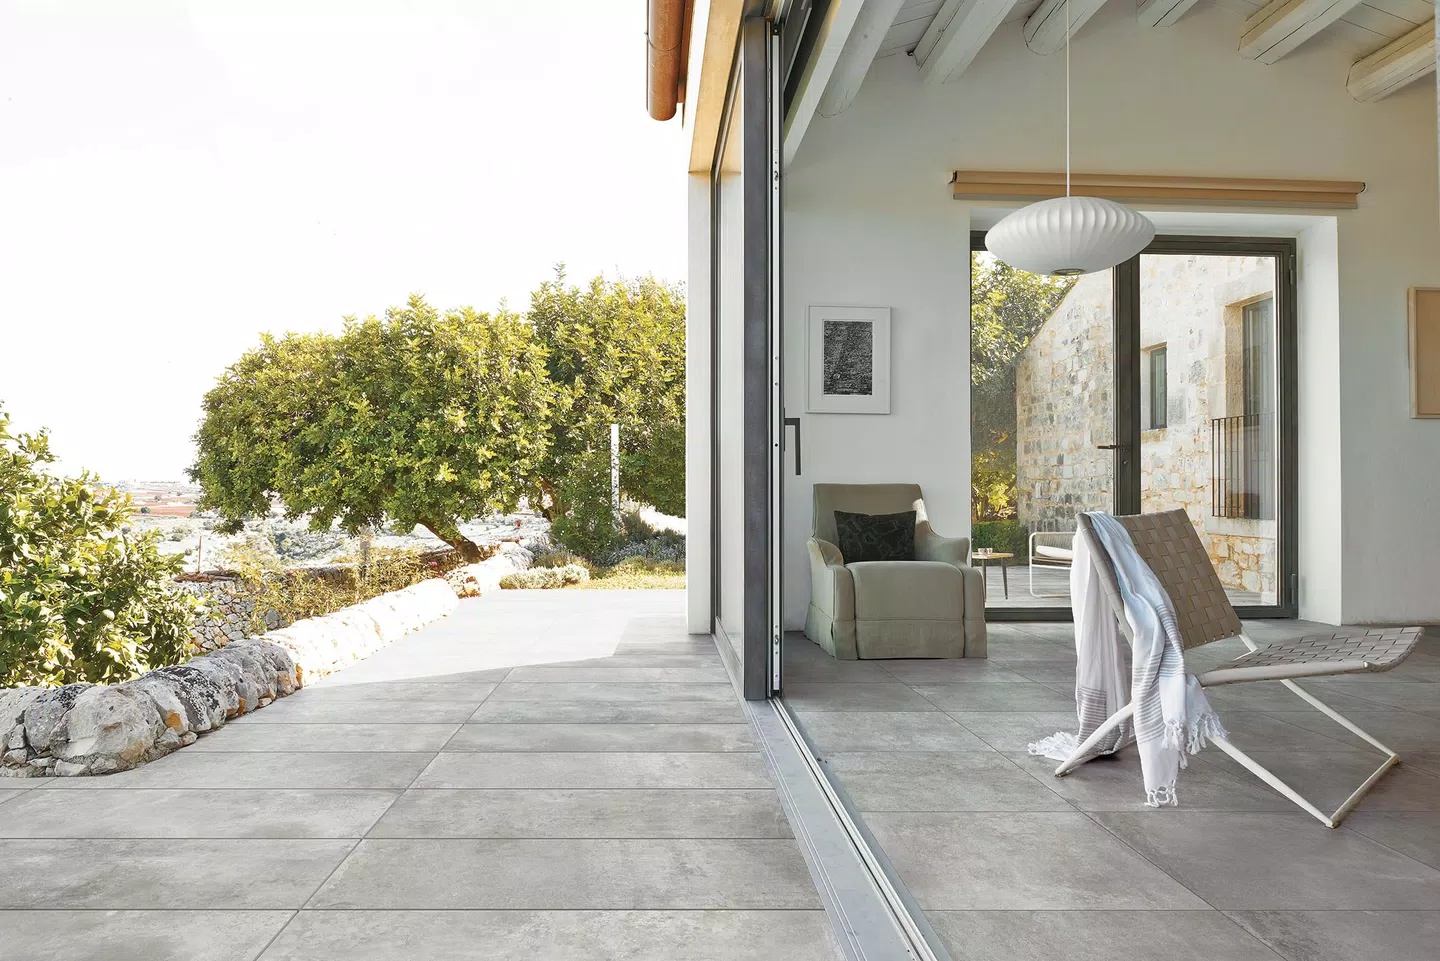 Porcelain stoneware can be applied both indoors and outdoors